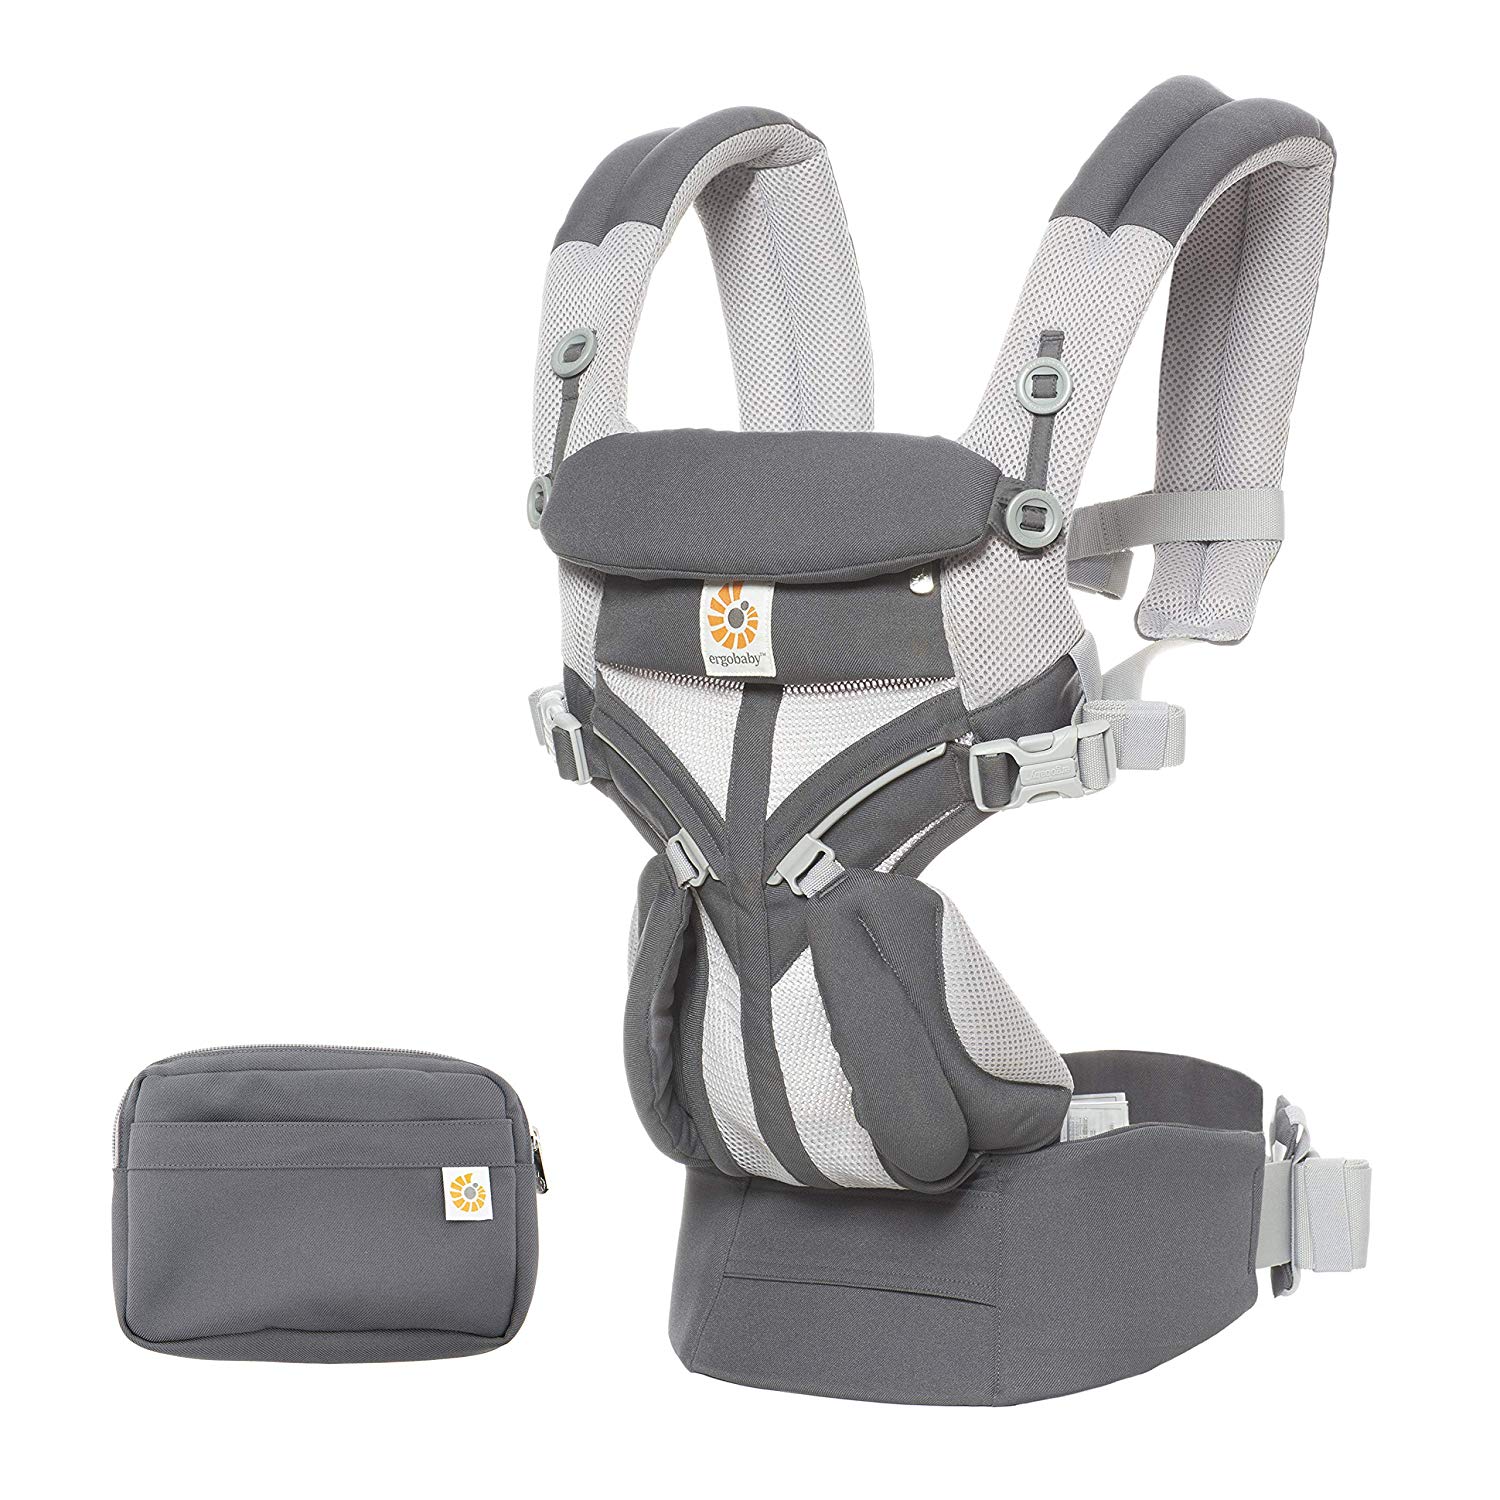 Ergobaby baby carrier for newborns from birth up to 20 kg, 4-in-1 Omni 360 Cool Air Mesh Carbon grey, child carrier carrier system